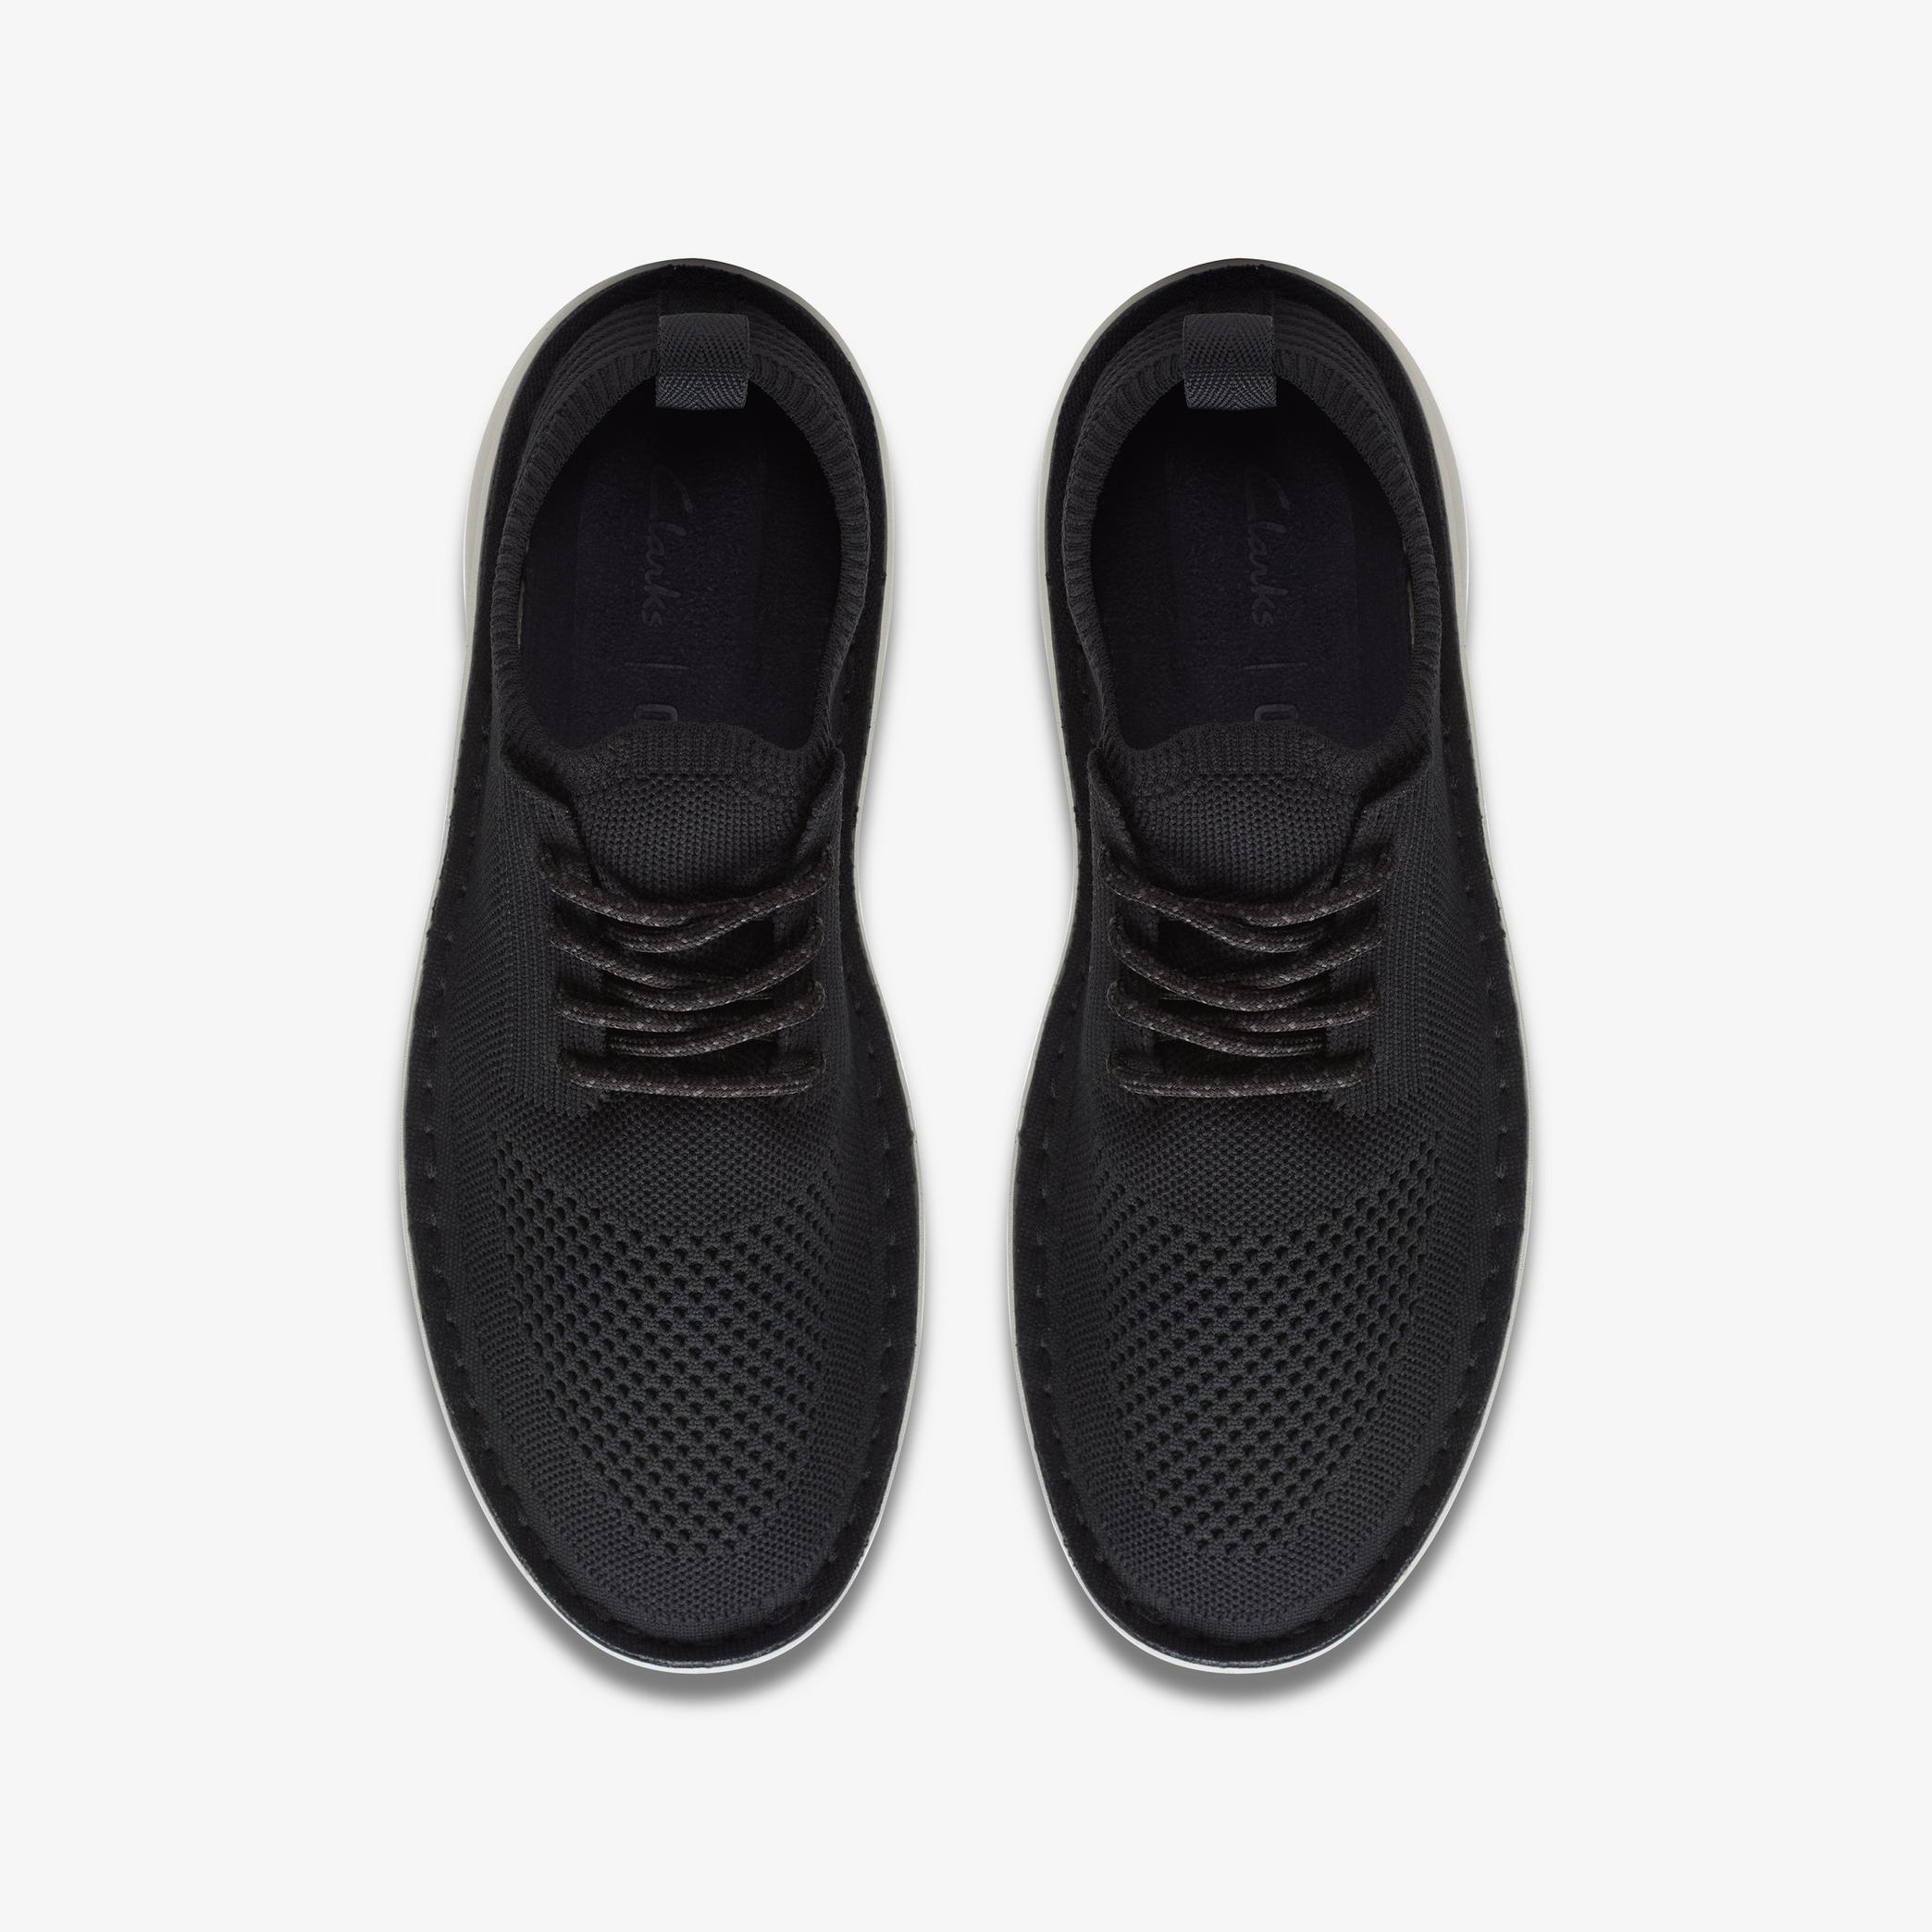 WOMENS Clarks Origin2 Black Knit Trainers | Clarks Outlet